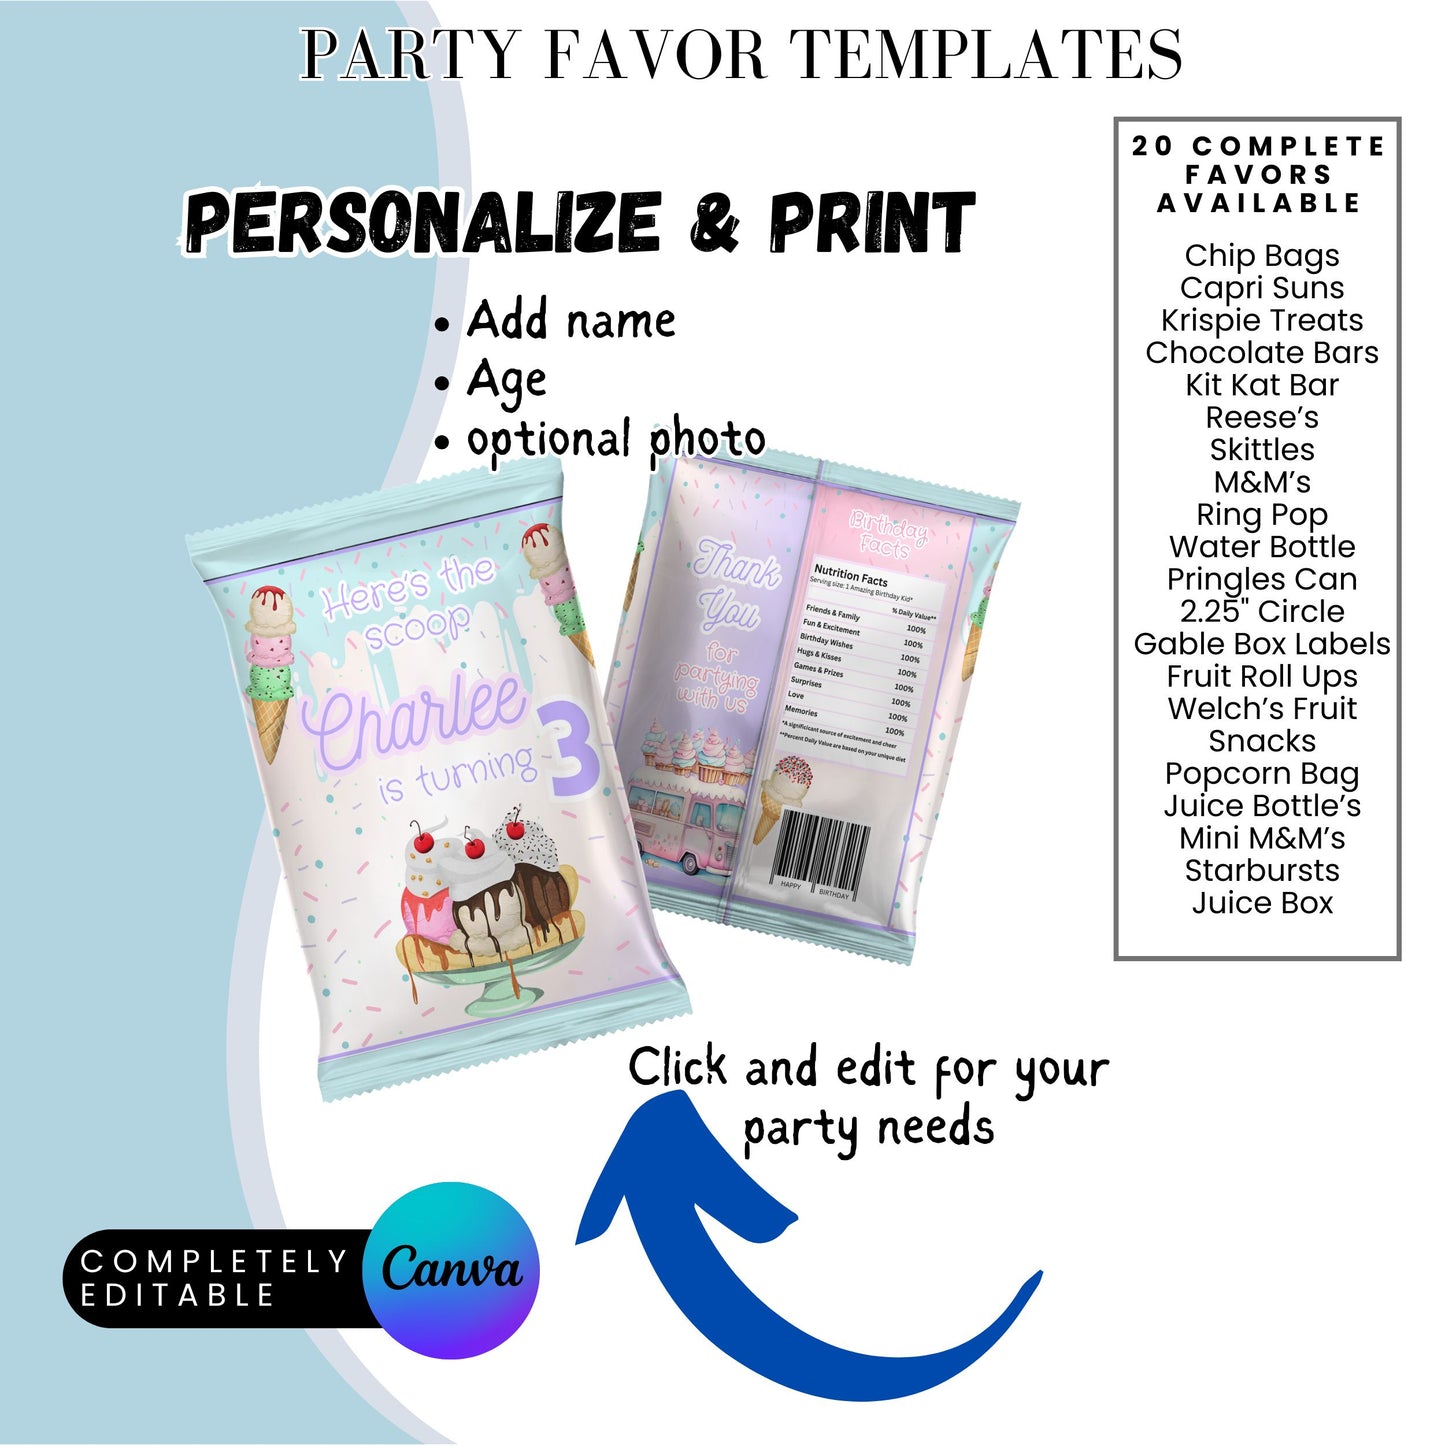 Here's The Scoop Ice Cream PartyParty Favor Templates Bundle